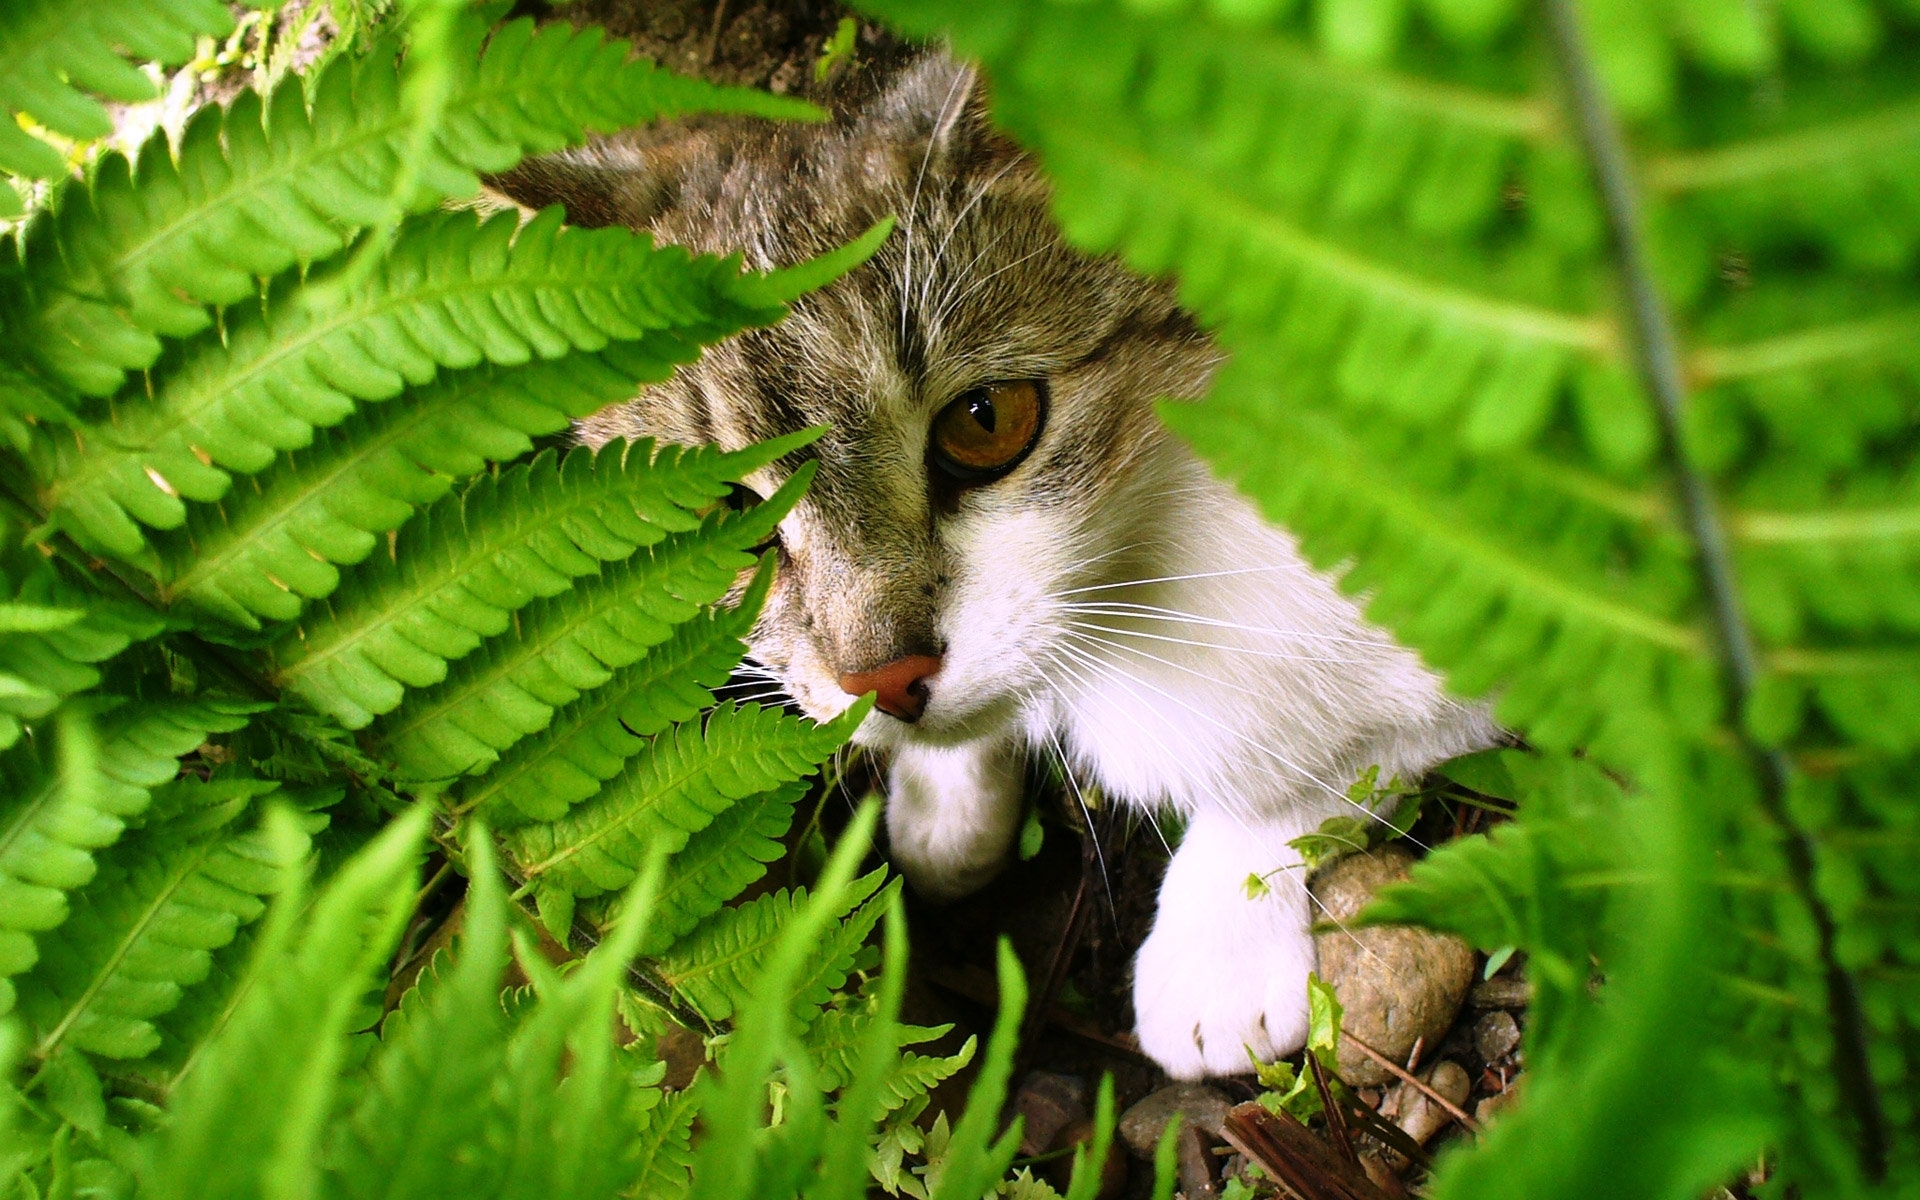 Cat among the leaves wallpapers and images - wallpapers, pictures, photos